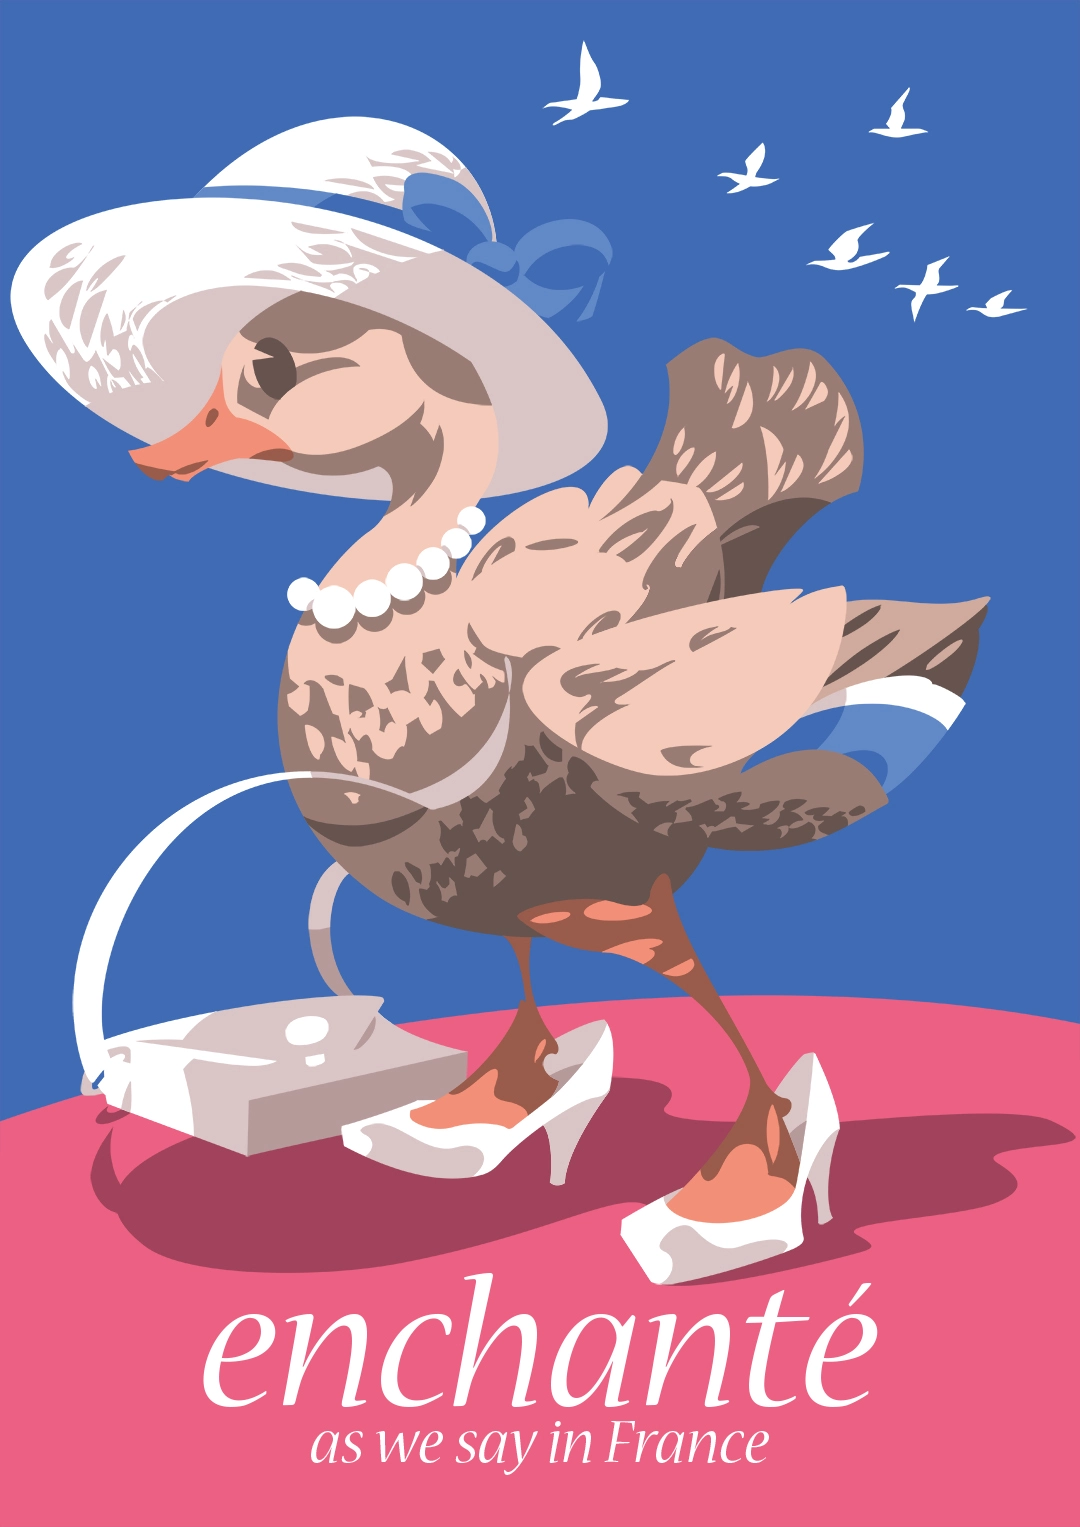 A mallard wearing high heels and accessories stands stands ready for luxury travel.